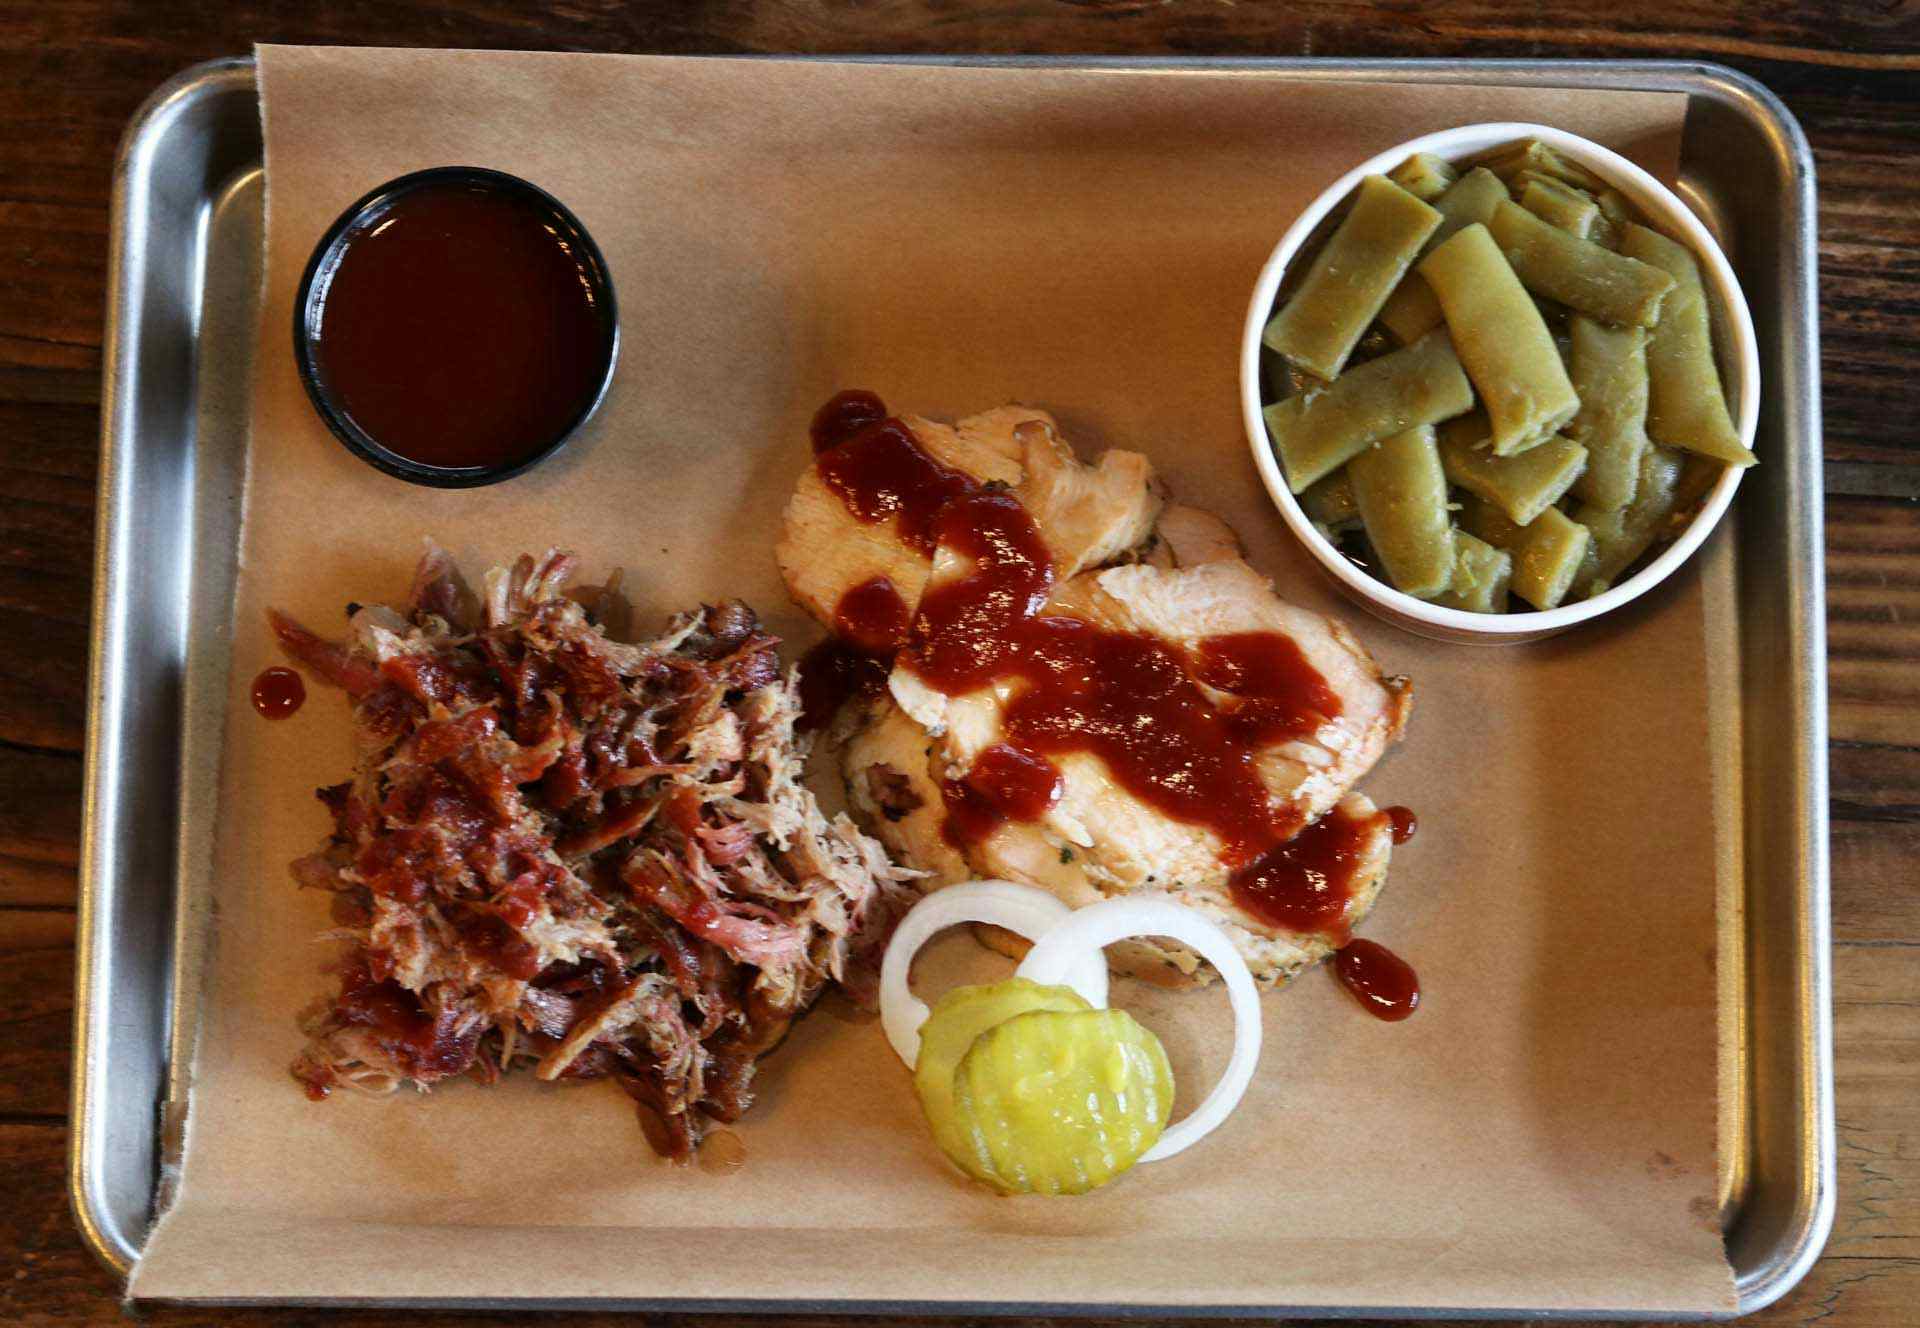 Dickey’s Pit-Smoked Barbecue Only a Dollar in Fort Collins on Friday